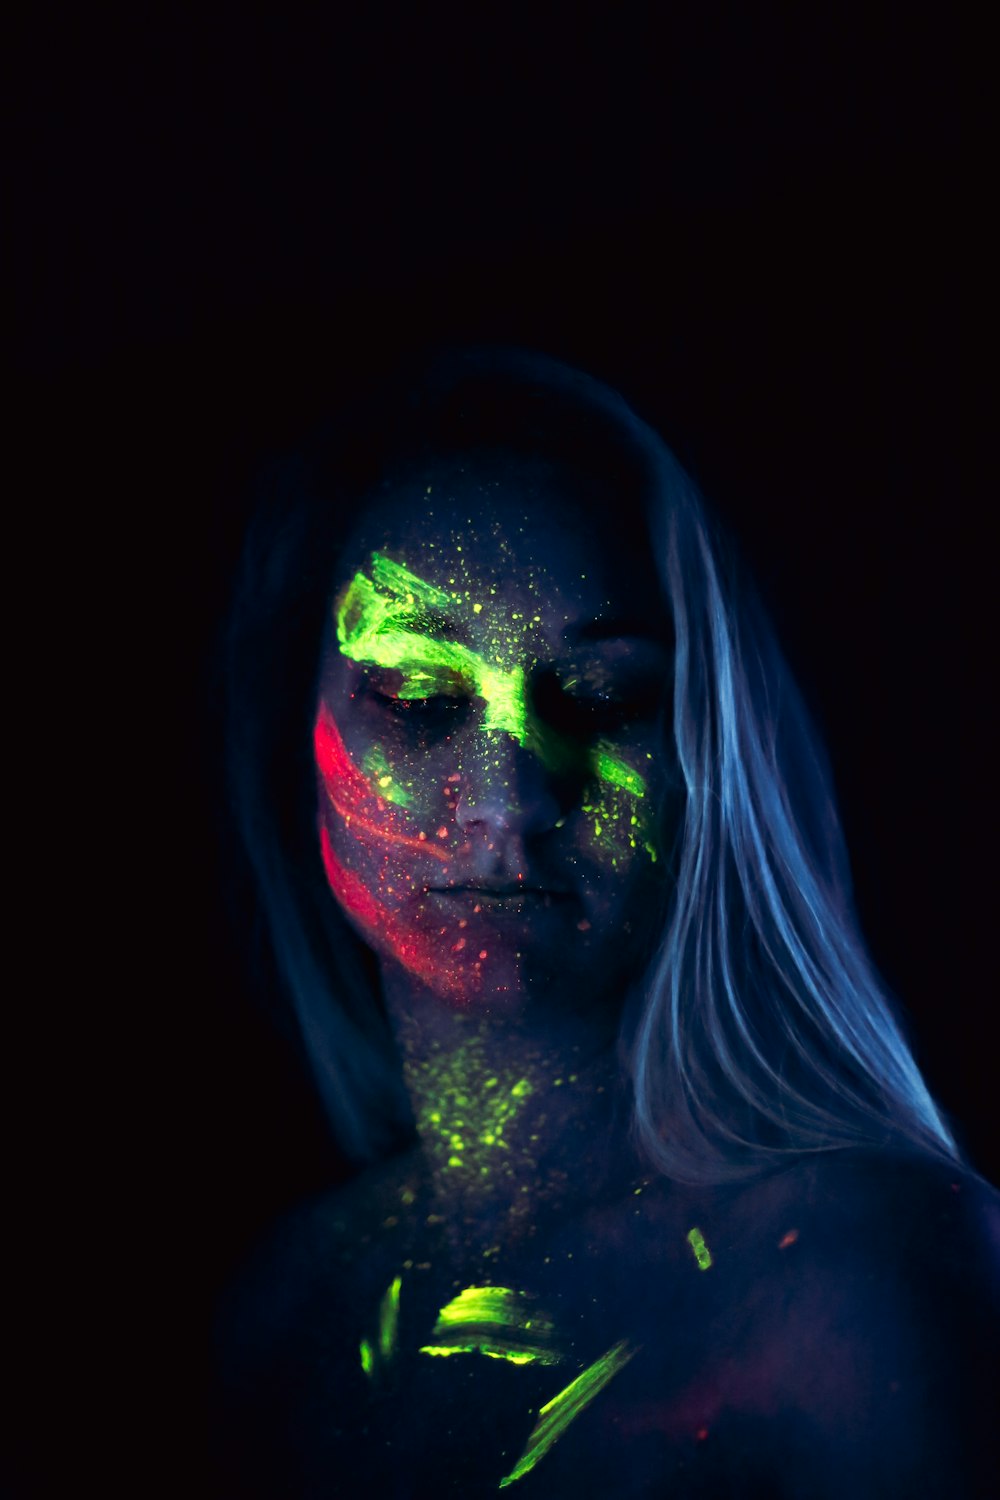 woman with green and red face paint